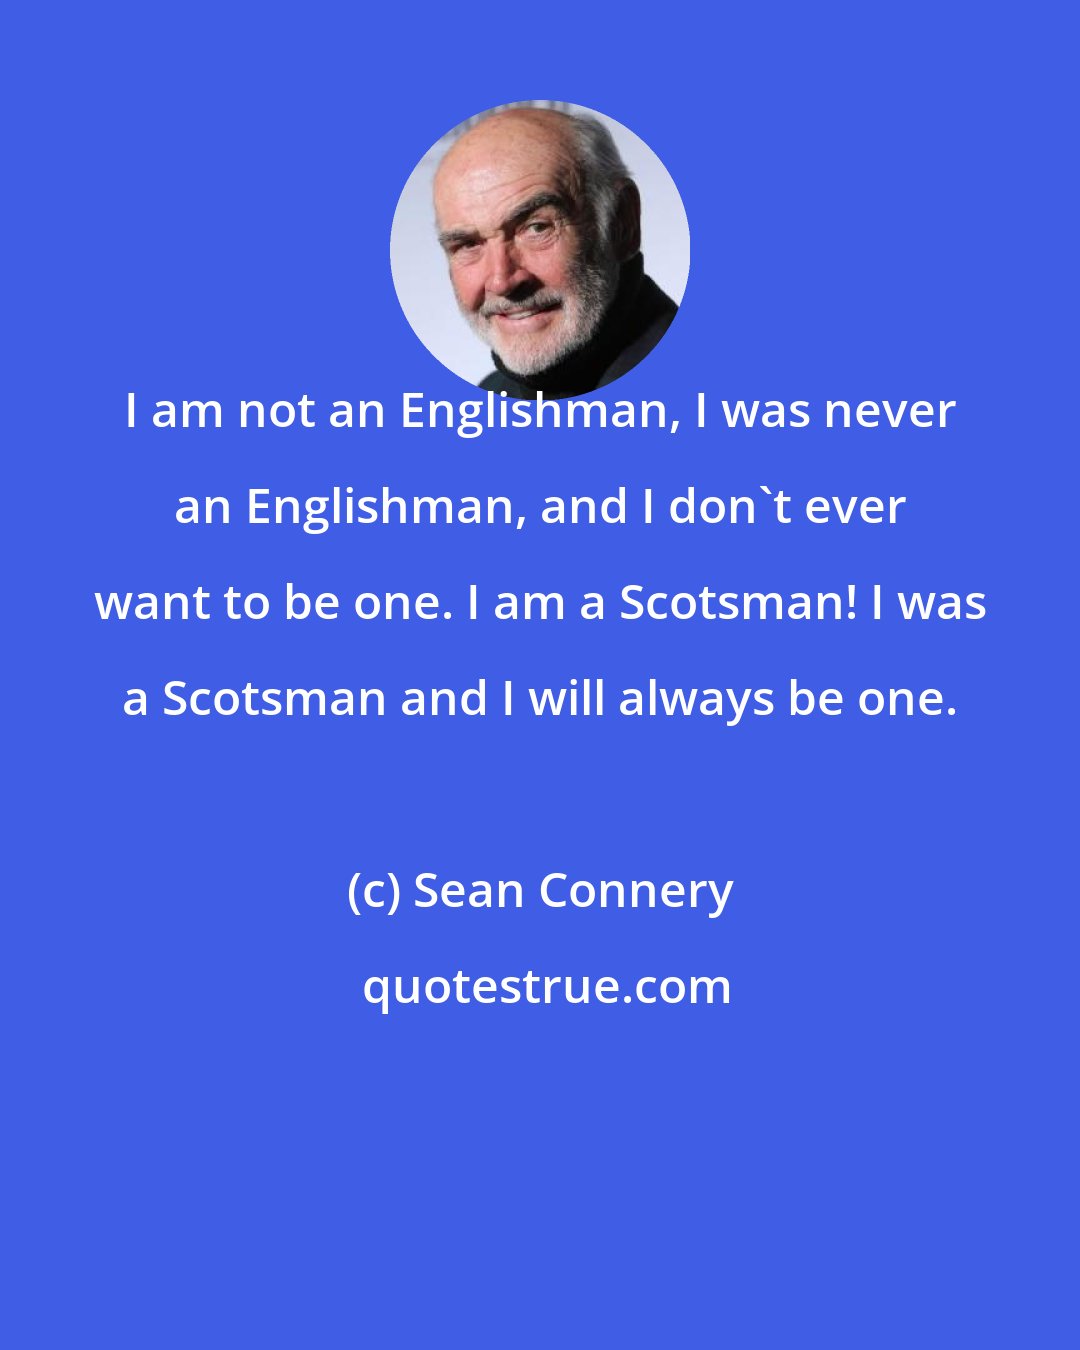 Sean Connery: I am not an Englishman, I was never an Englishman, and I don't ever want to be one. I am a Scotsman! I was a Scotsman and I will always be one.